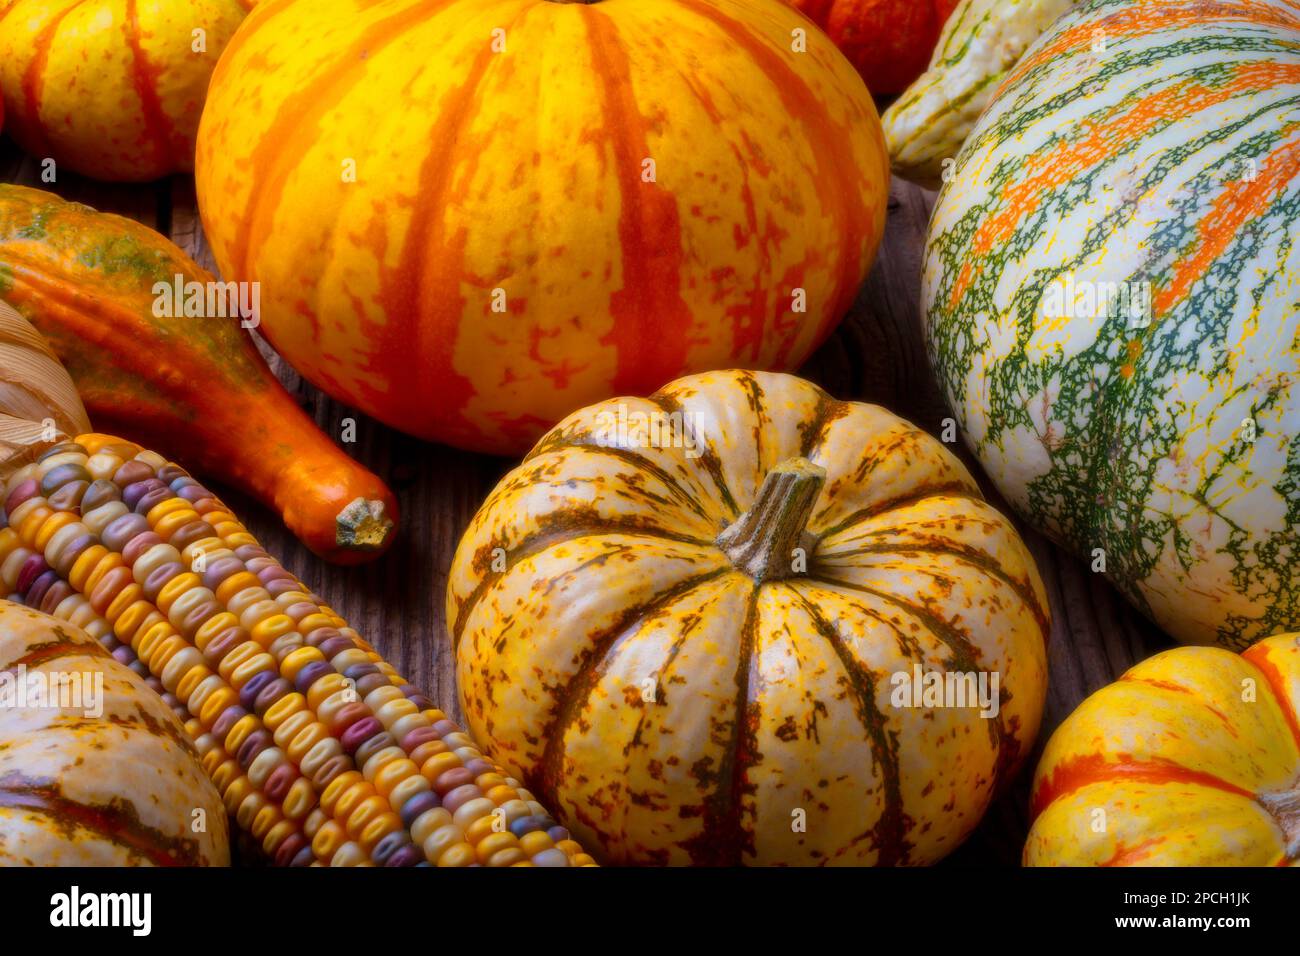 Colorful Autumn Pumpkin Stll life With Indian Corn Stock Photo